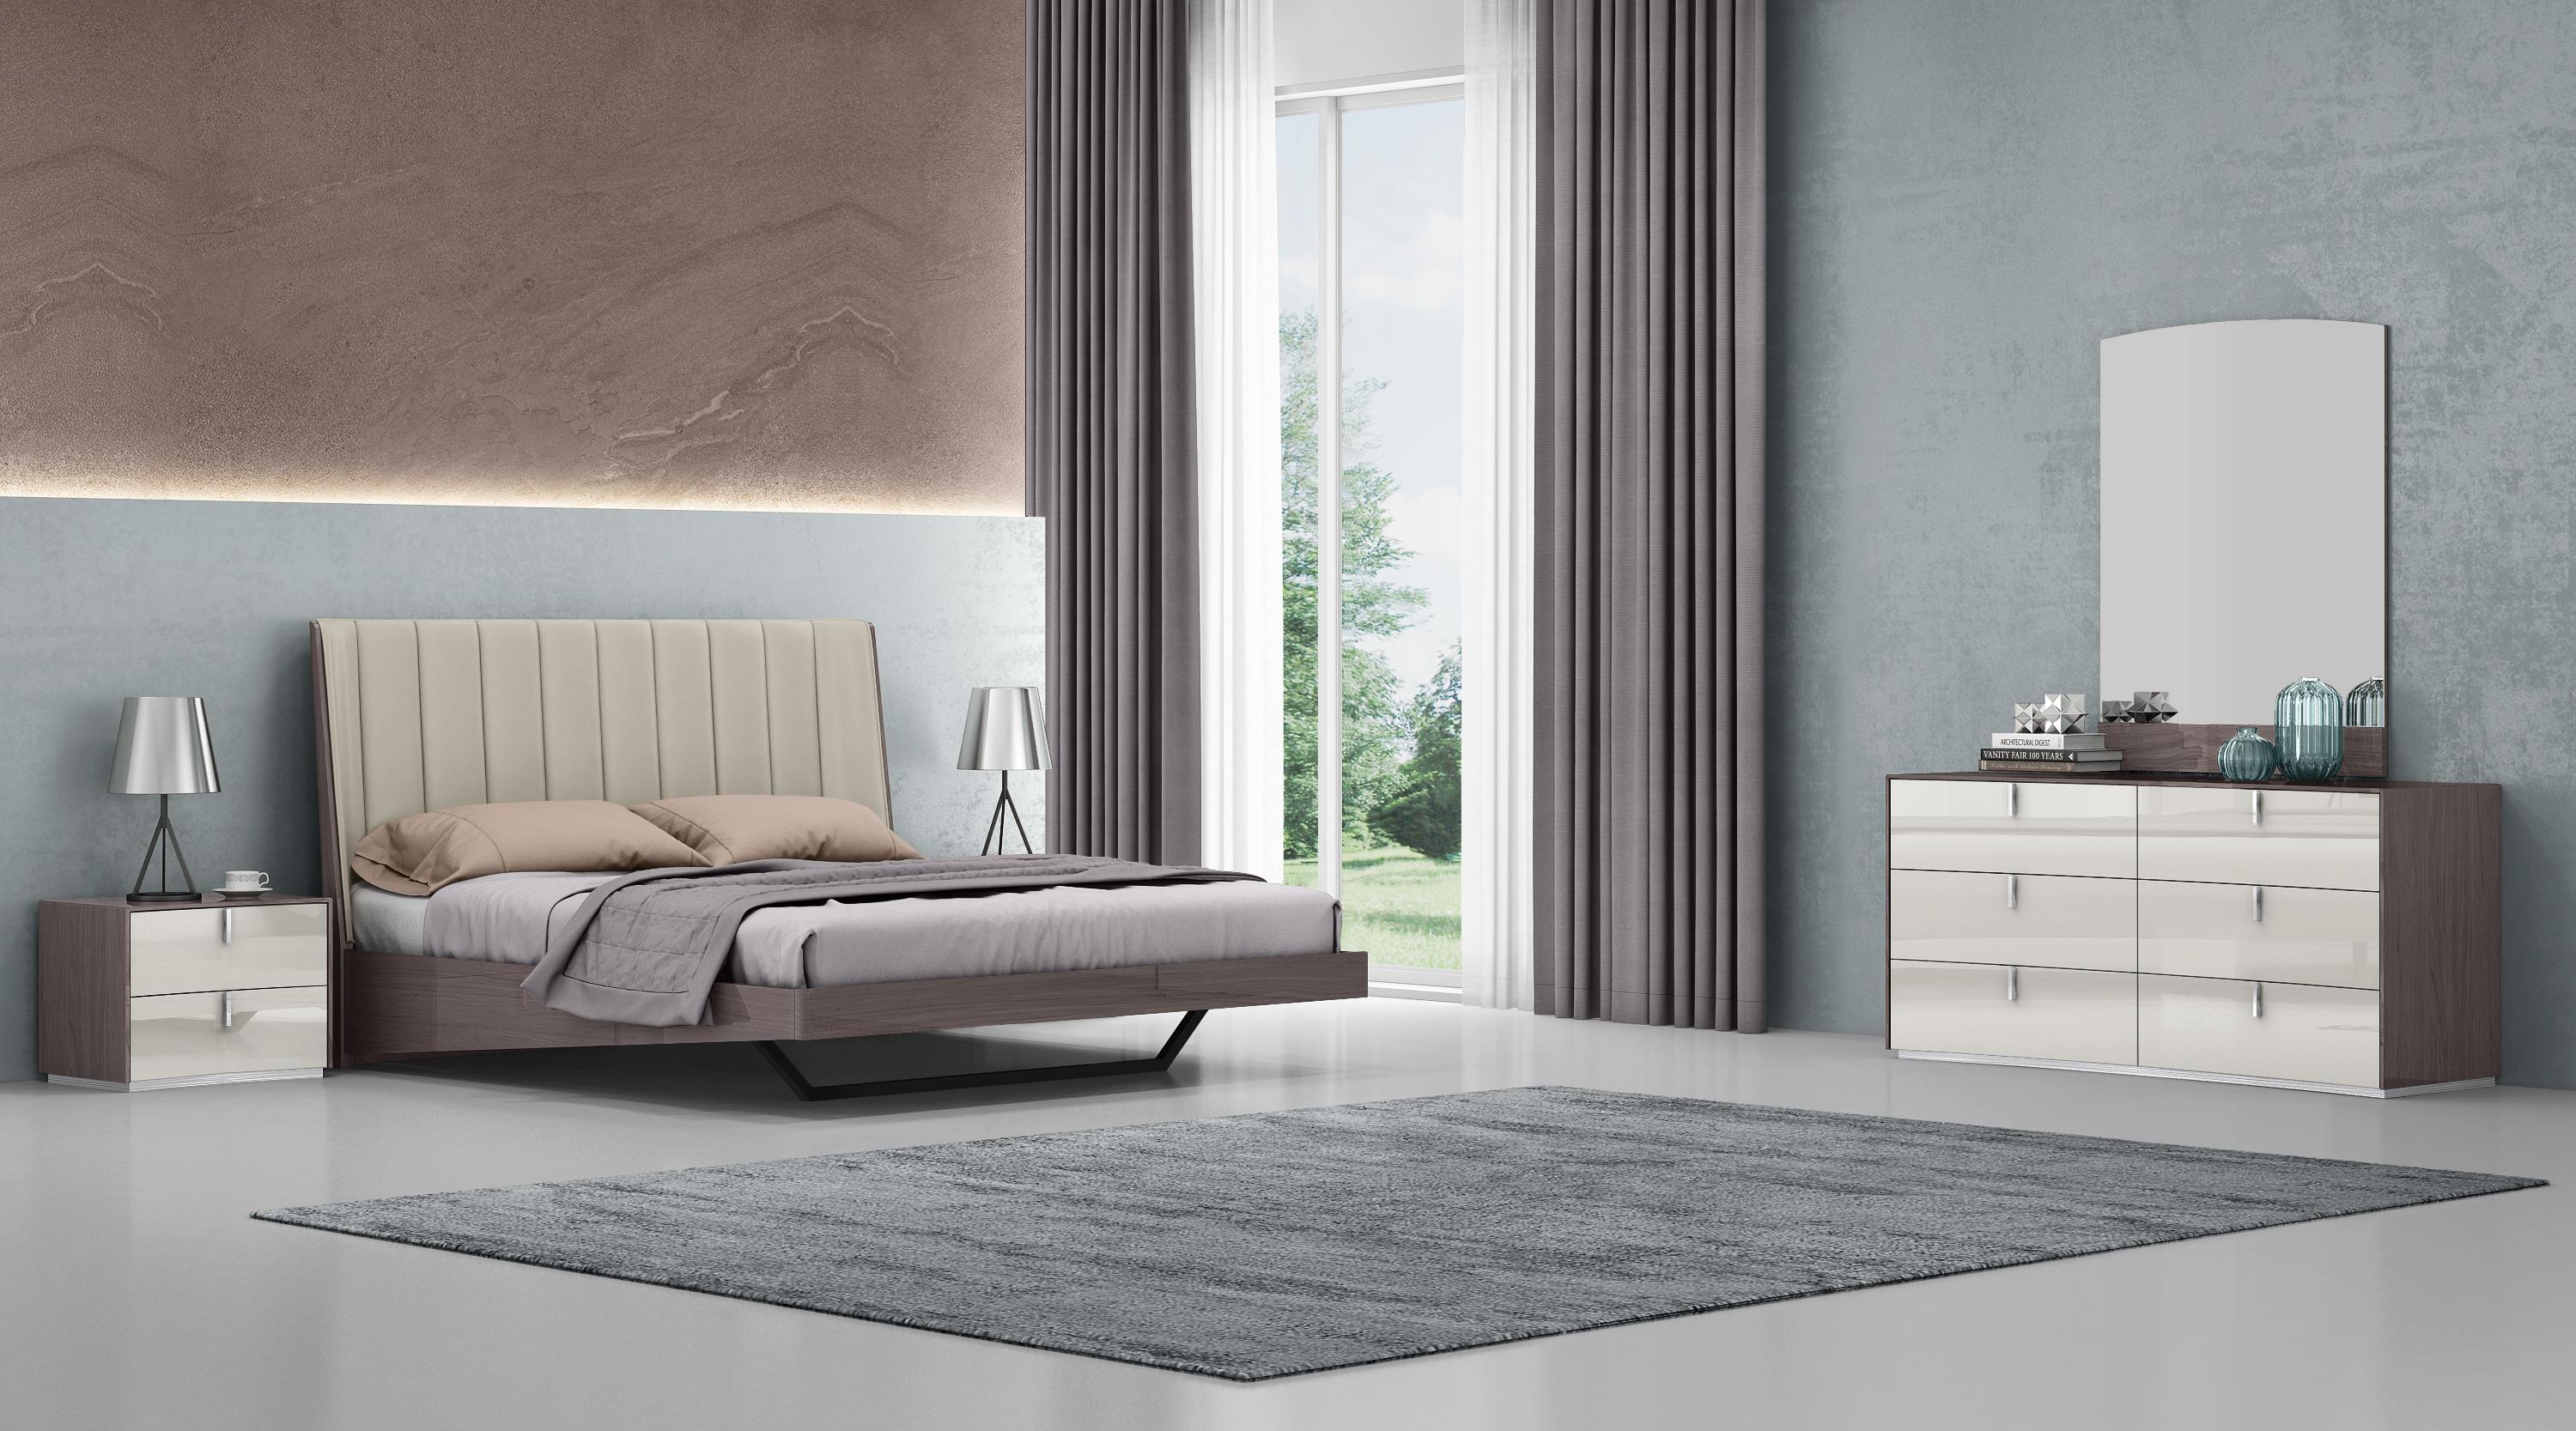 Contemporary Bedroom Set BQ1754-GRY/LGRY-5PC Berlin BQ1754-GRY/LGRY-5PC in Light Gray Faux Leather